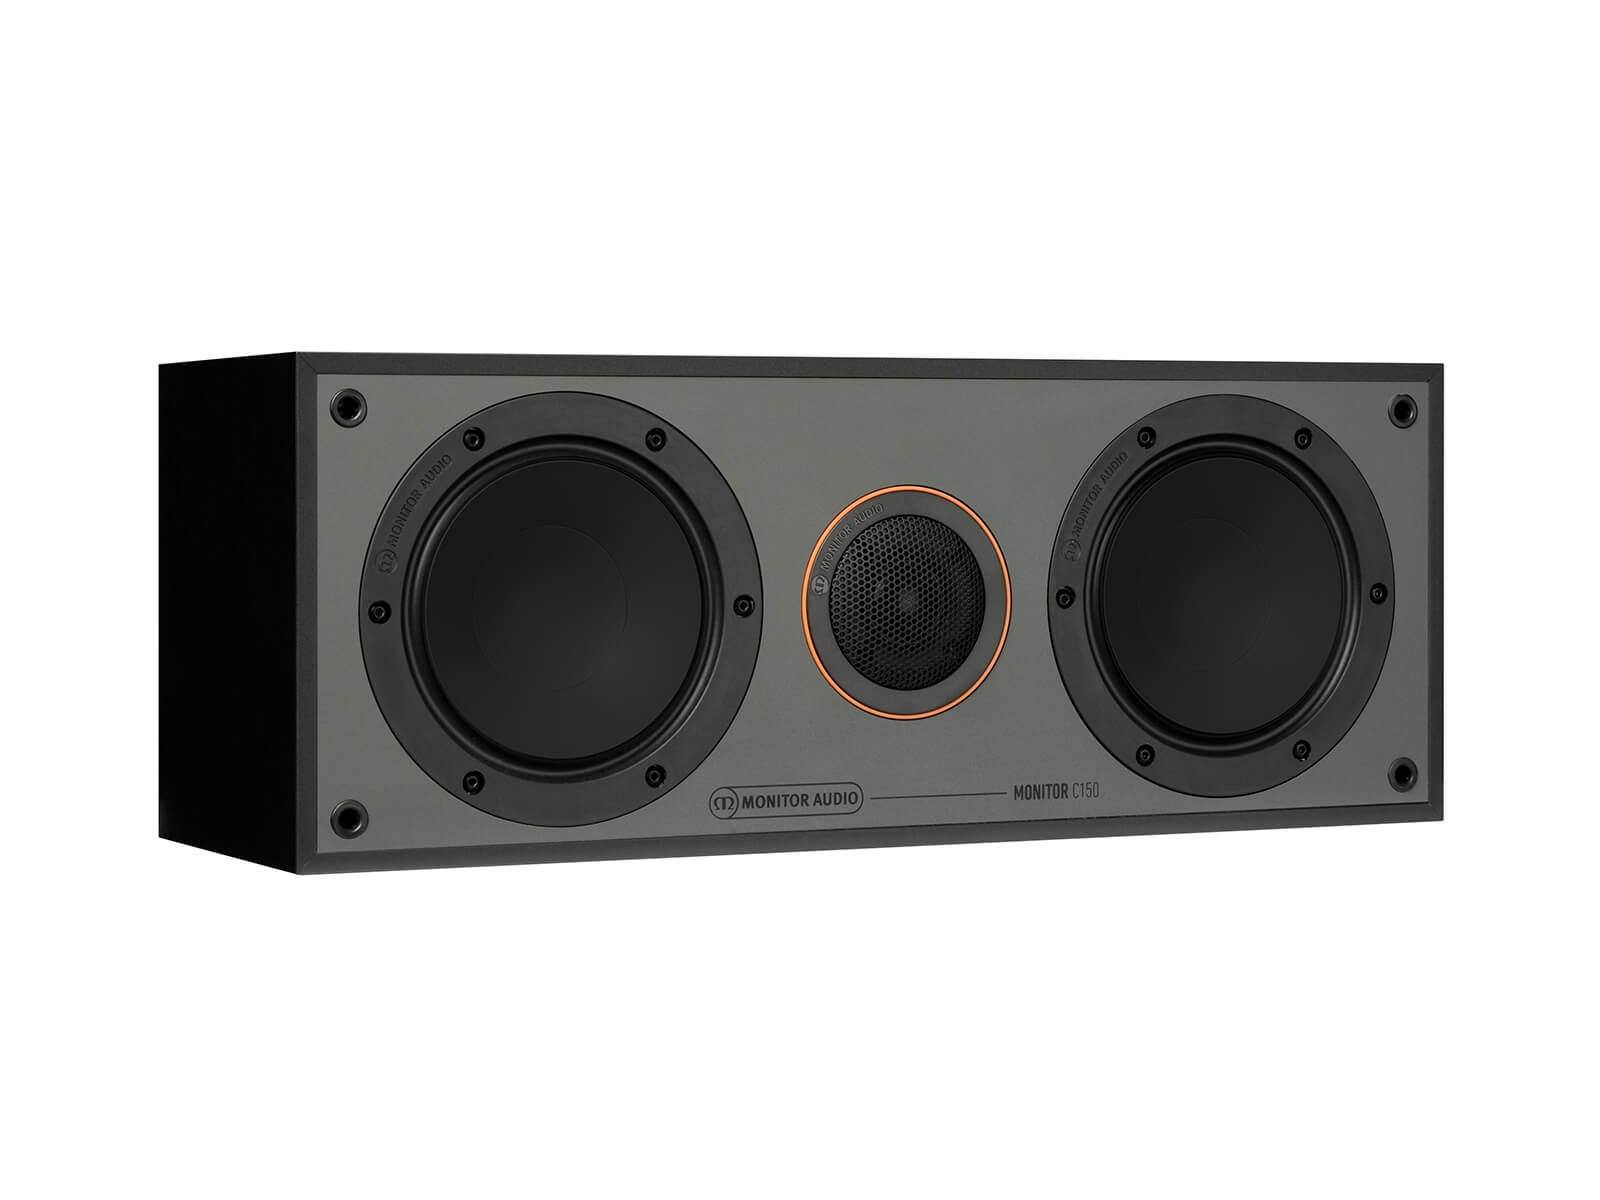 Monitor C150, grille-less centre channel speakers, with a black finish.